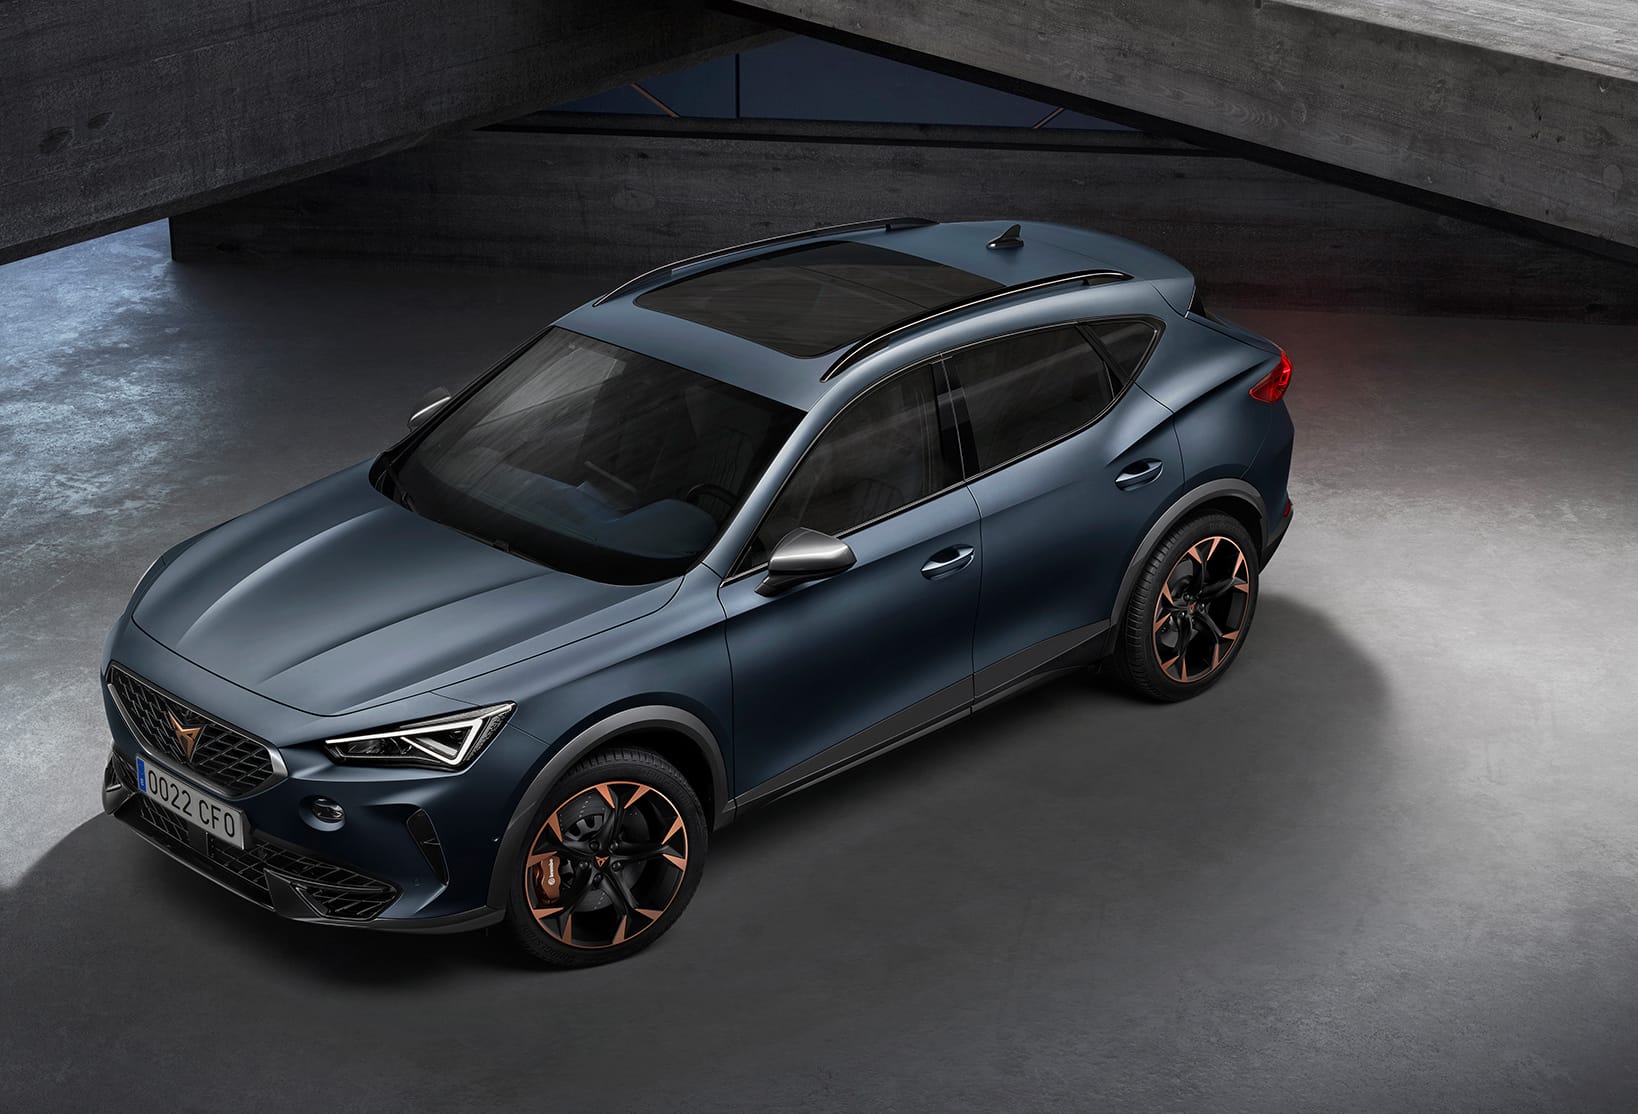 New CUPRA Formentor side view of the suv coupe